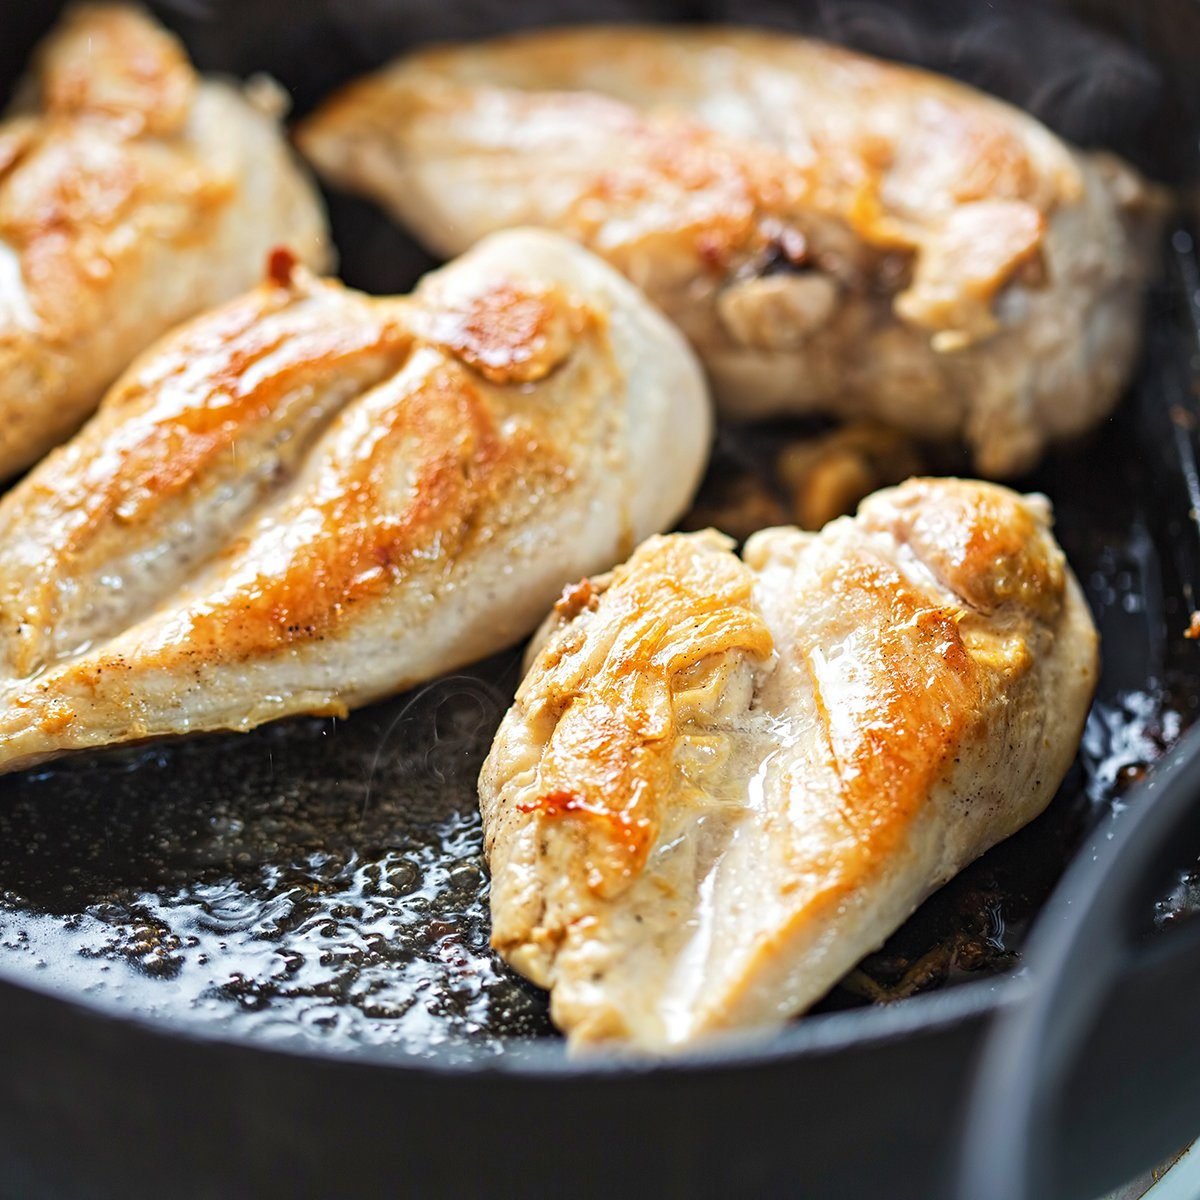 Fried chicken breasts on vegetable oil, iron cast pan